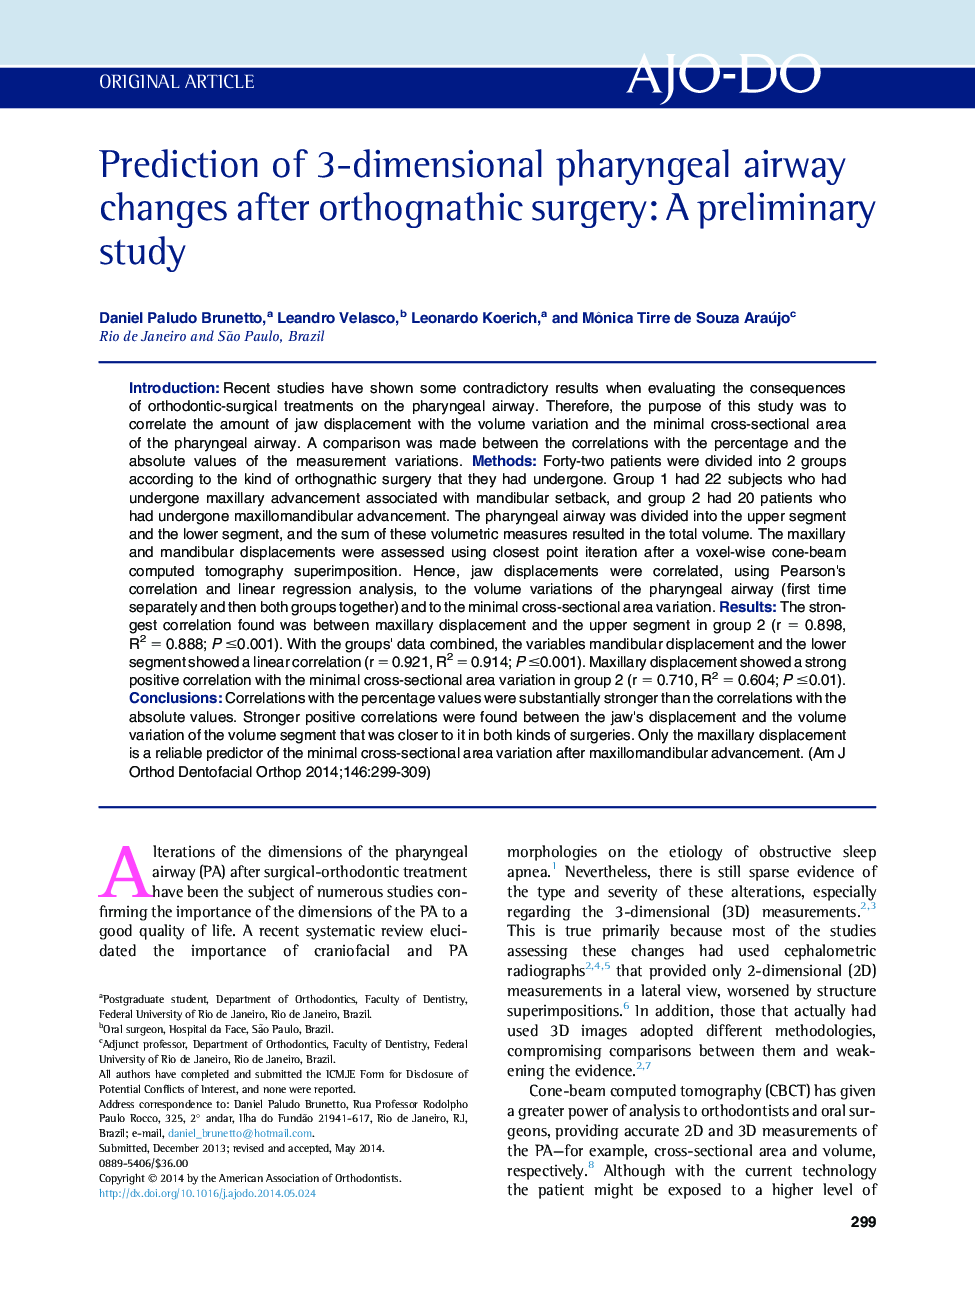 Prediction of 3-dimensional pharyngeal airway changes after orthognathic surgery: A preliminary study 